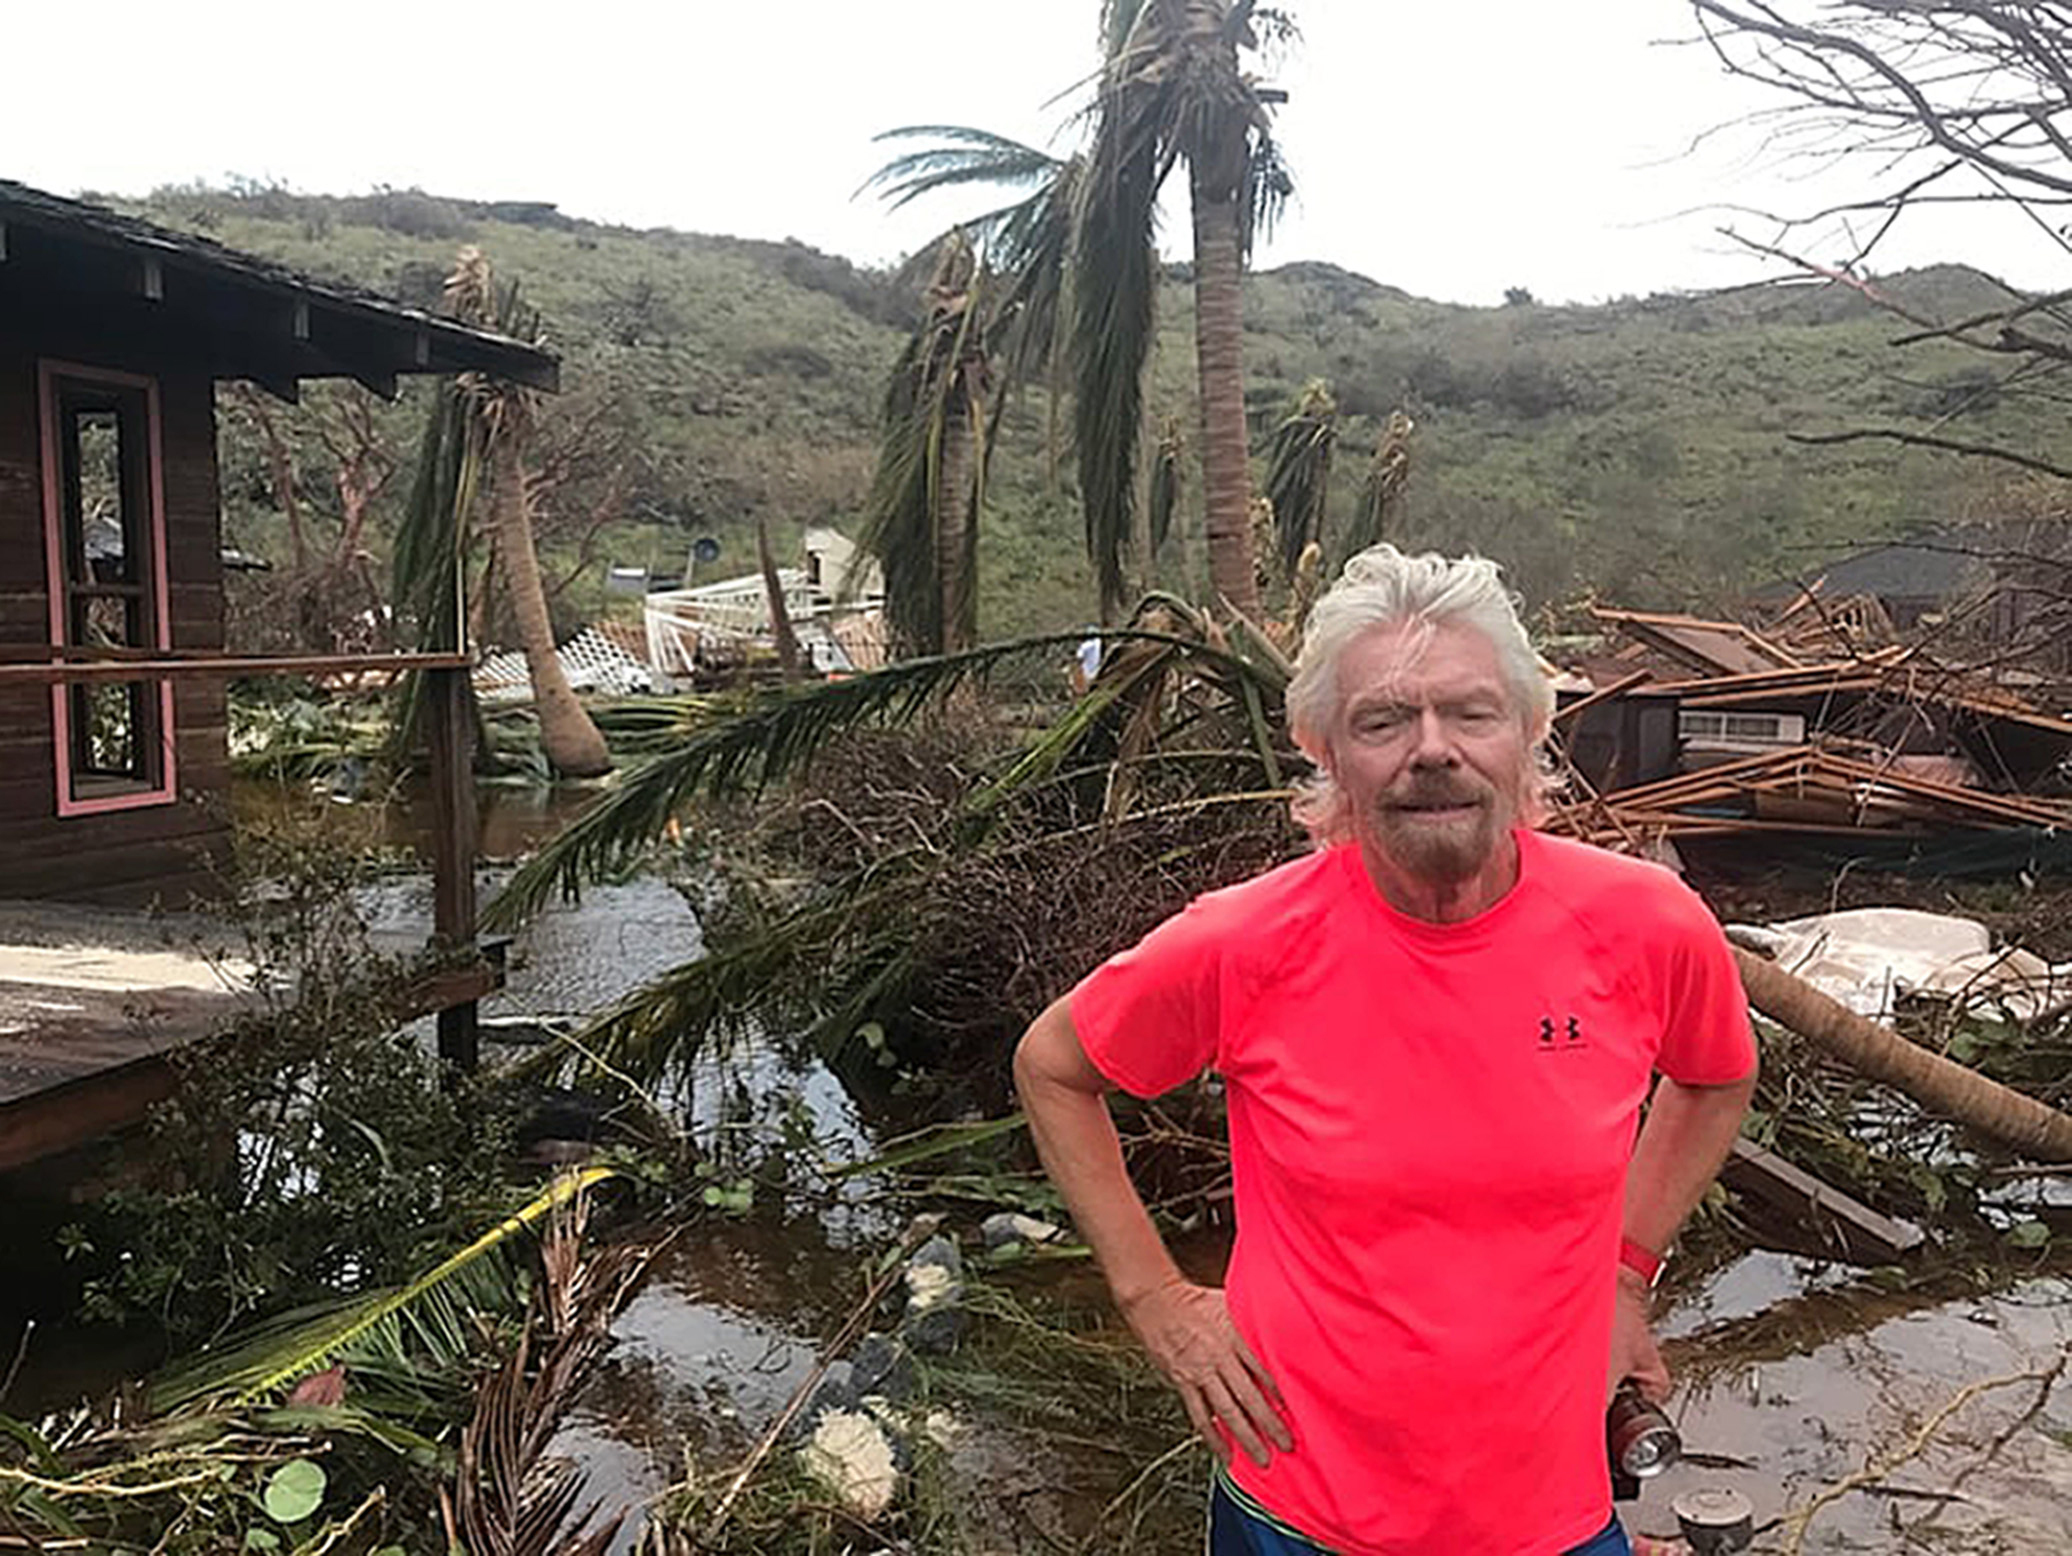 Sir Richard Branson amongst the debris on his private island Necker caused by Hurricane Irma in September 2017 (Branson Family/PA)